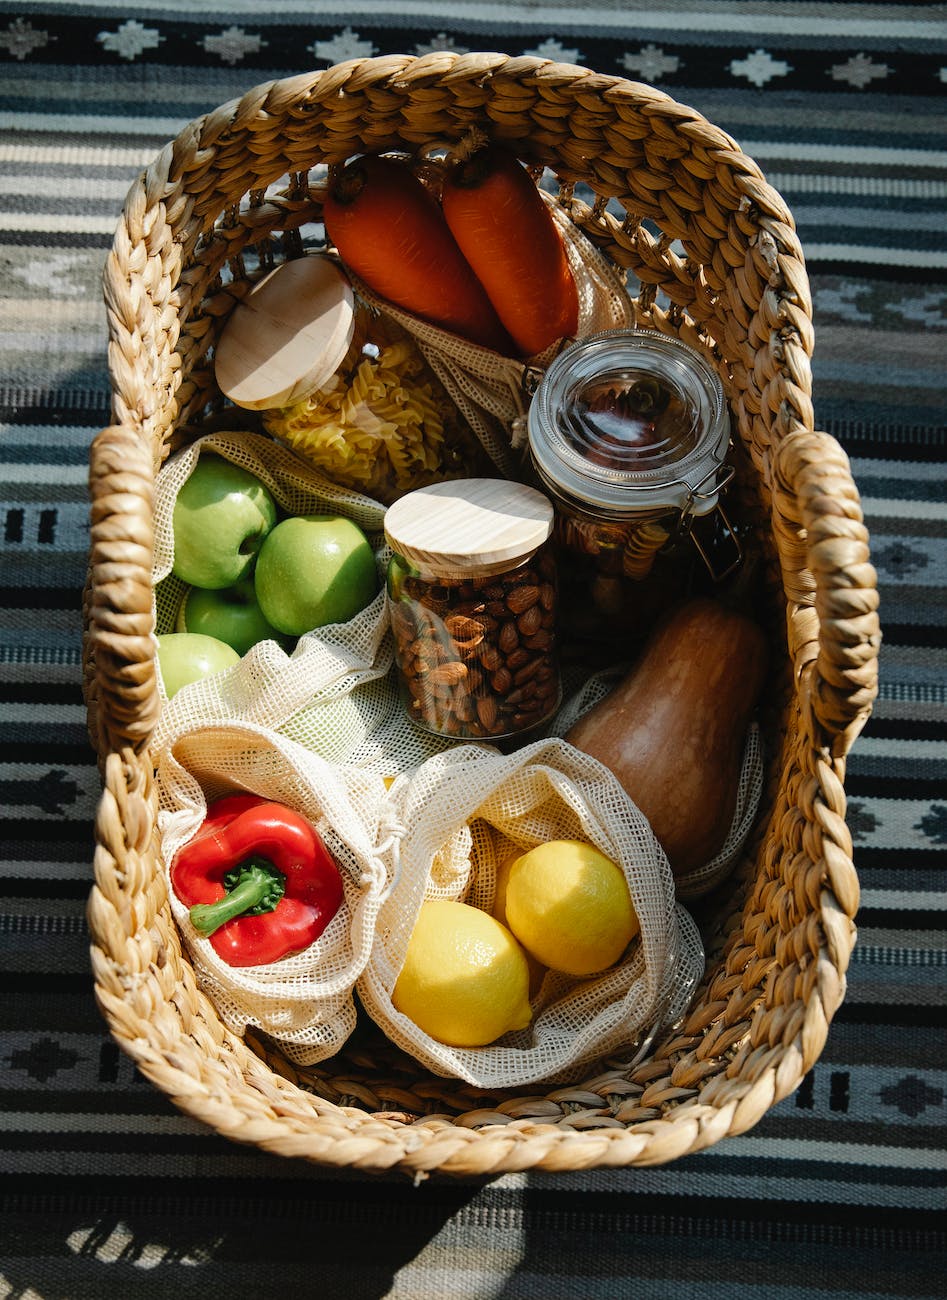 wicker basket with vegetables and products (Photo by Sarah Chai)